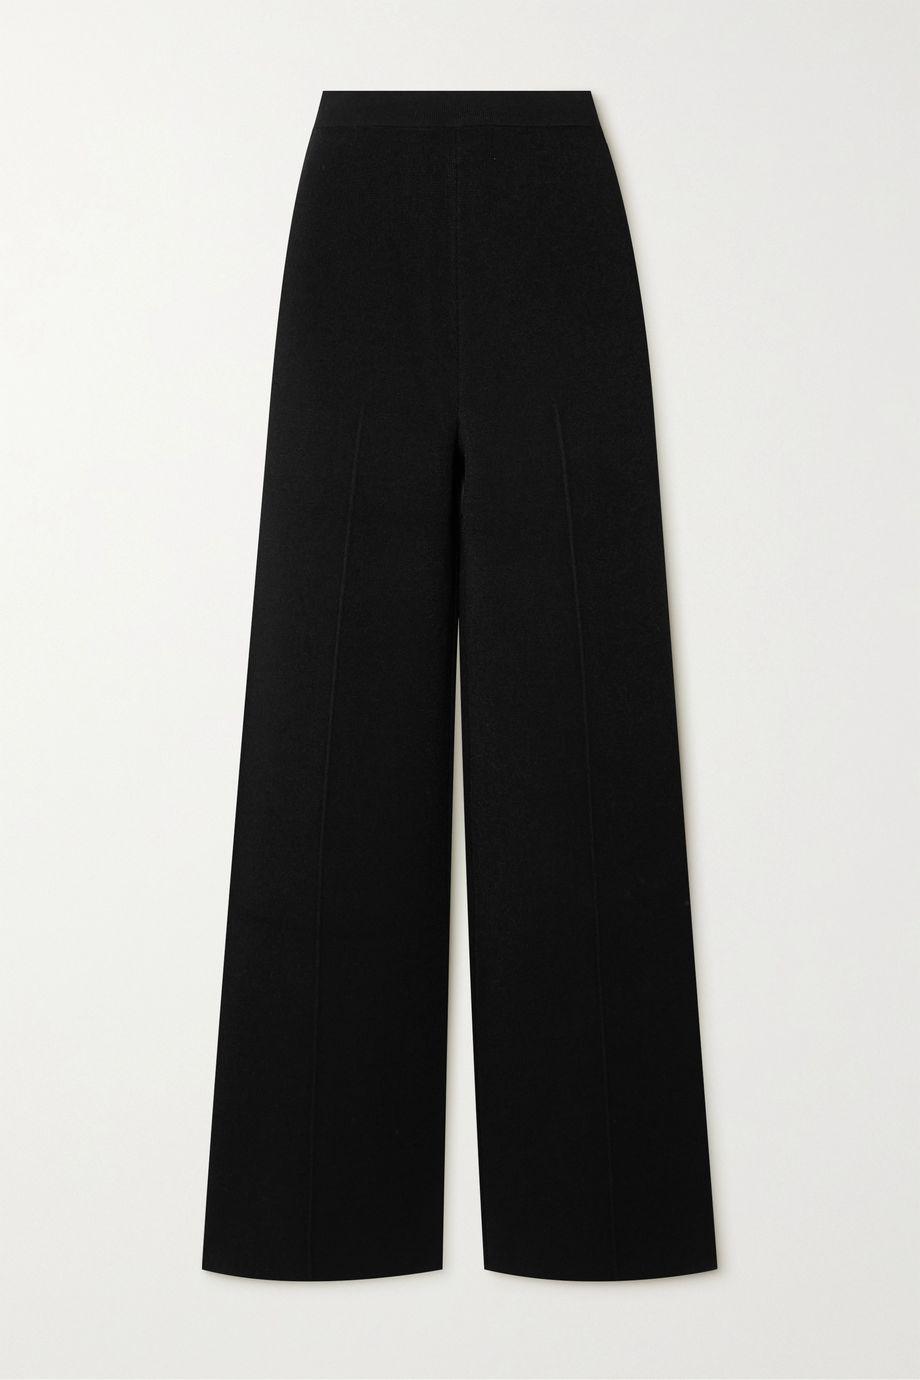 Jersey wide-leg pants by CAES